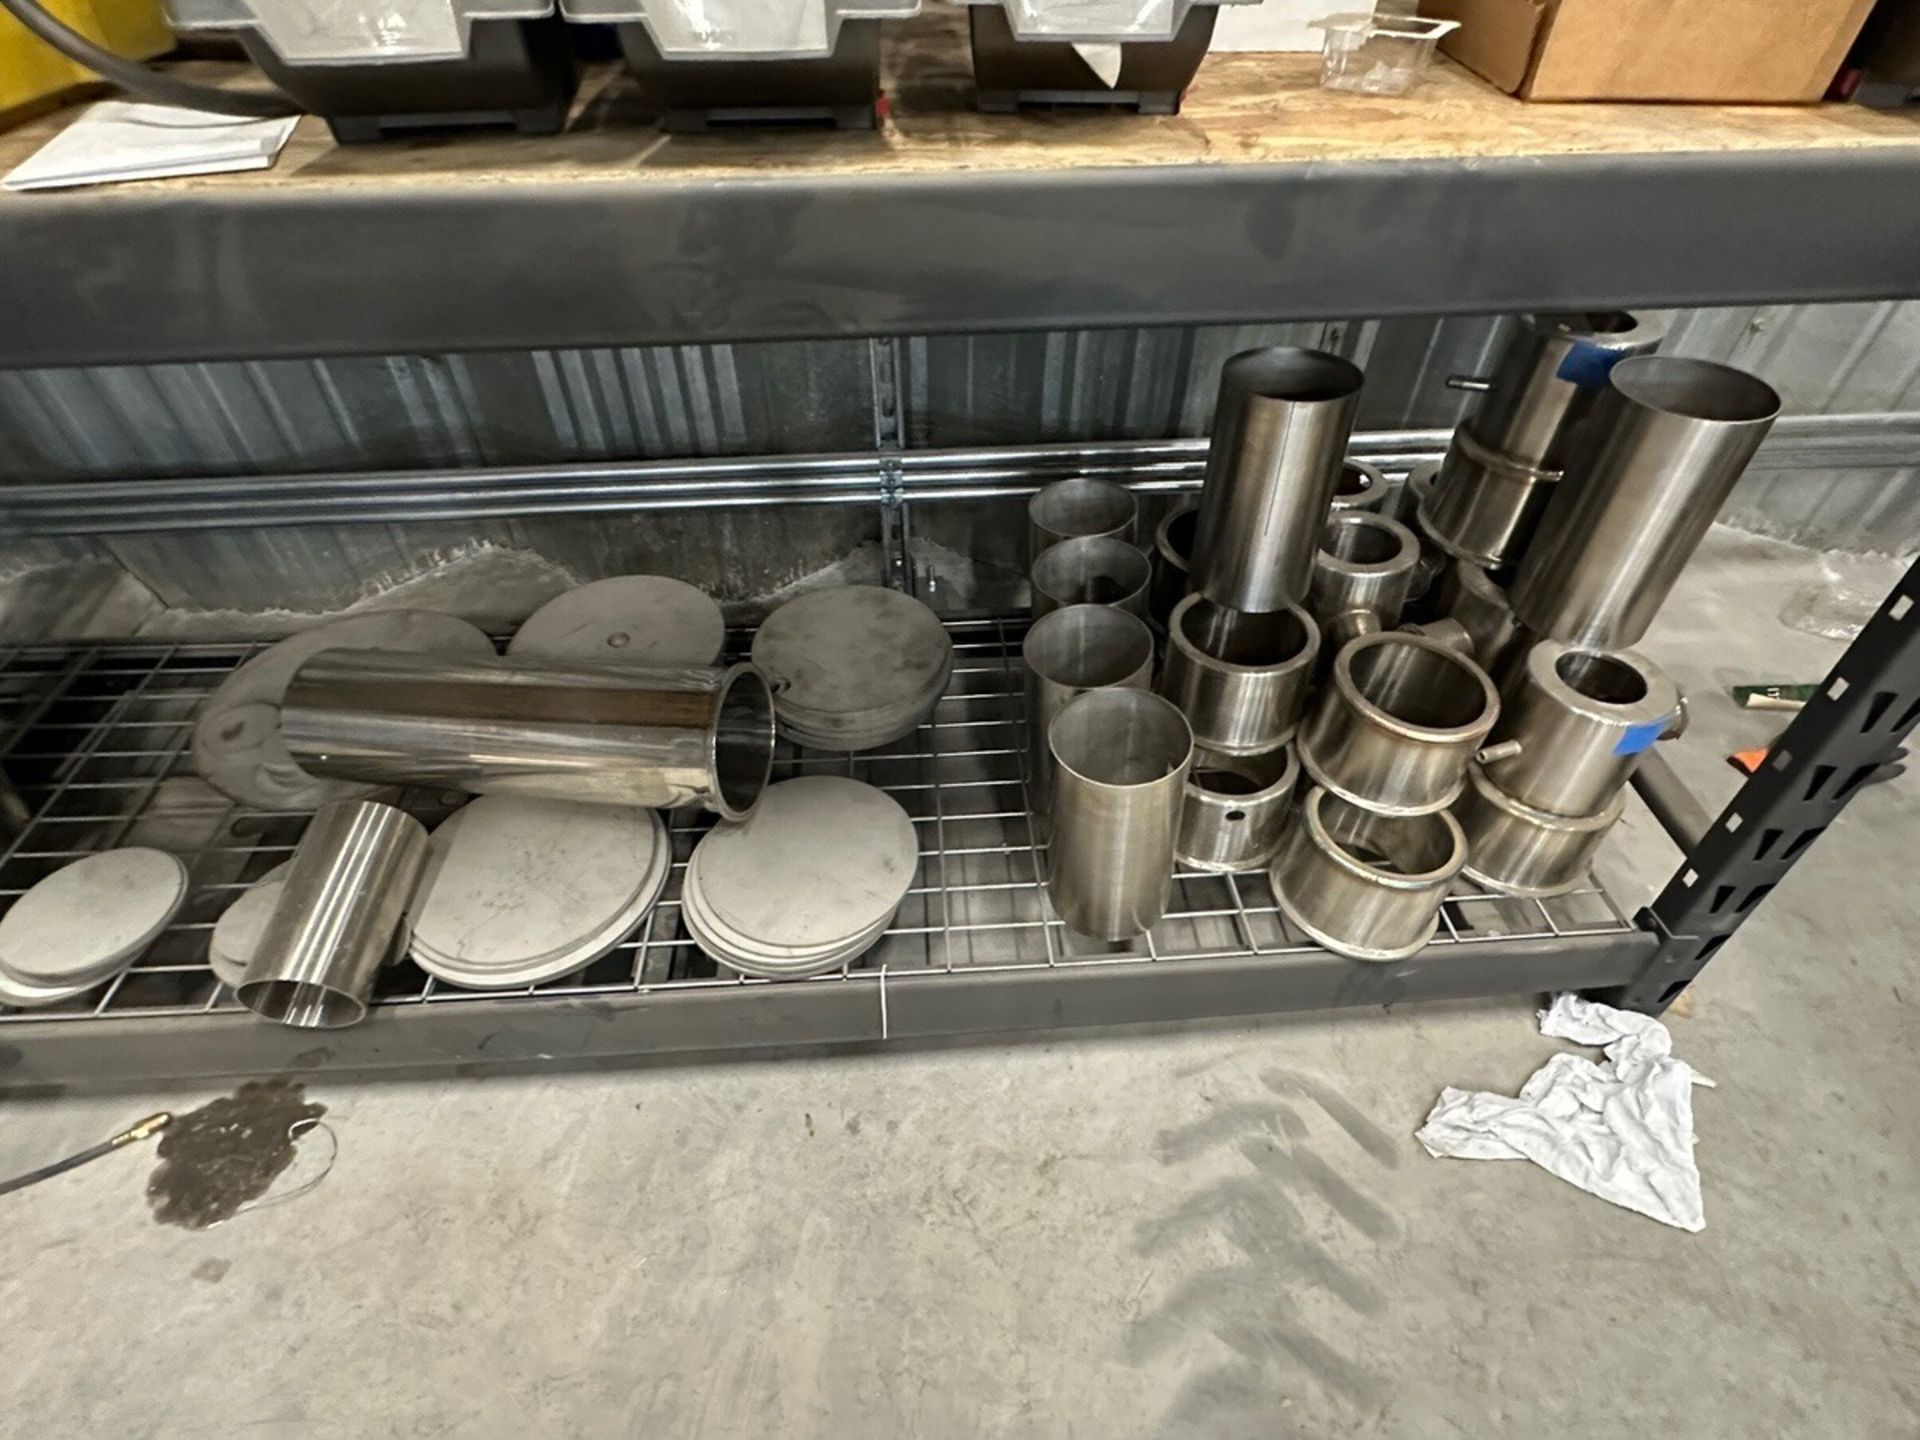 Shelf With Contents, Stainless Steel Fittings | Rig Fee $125 - Image 11 of 12